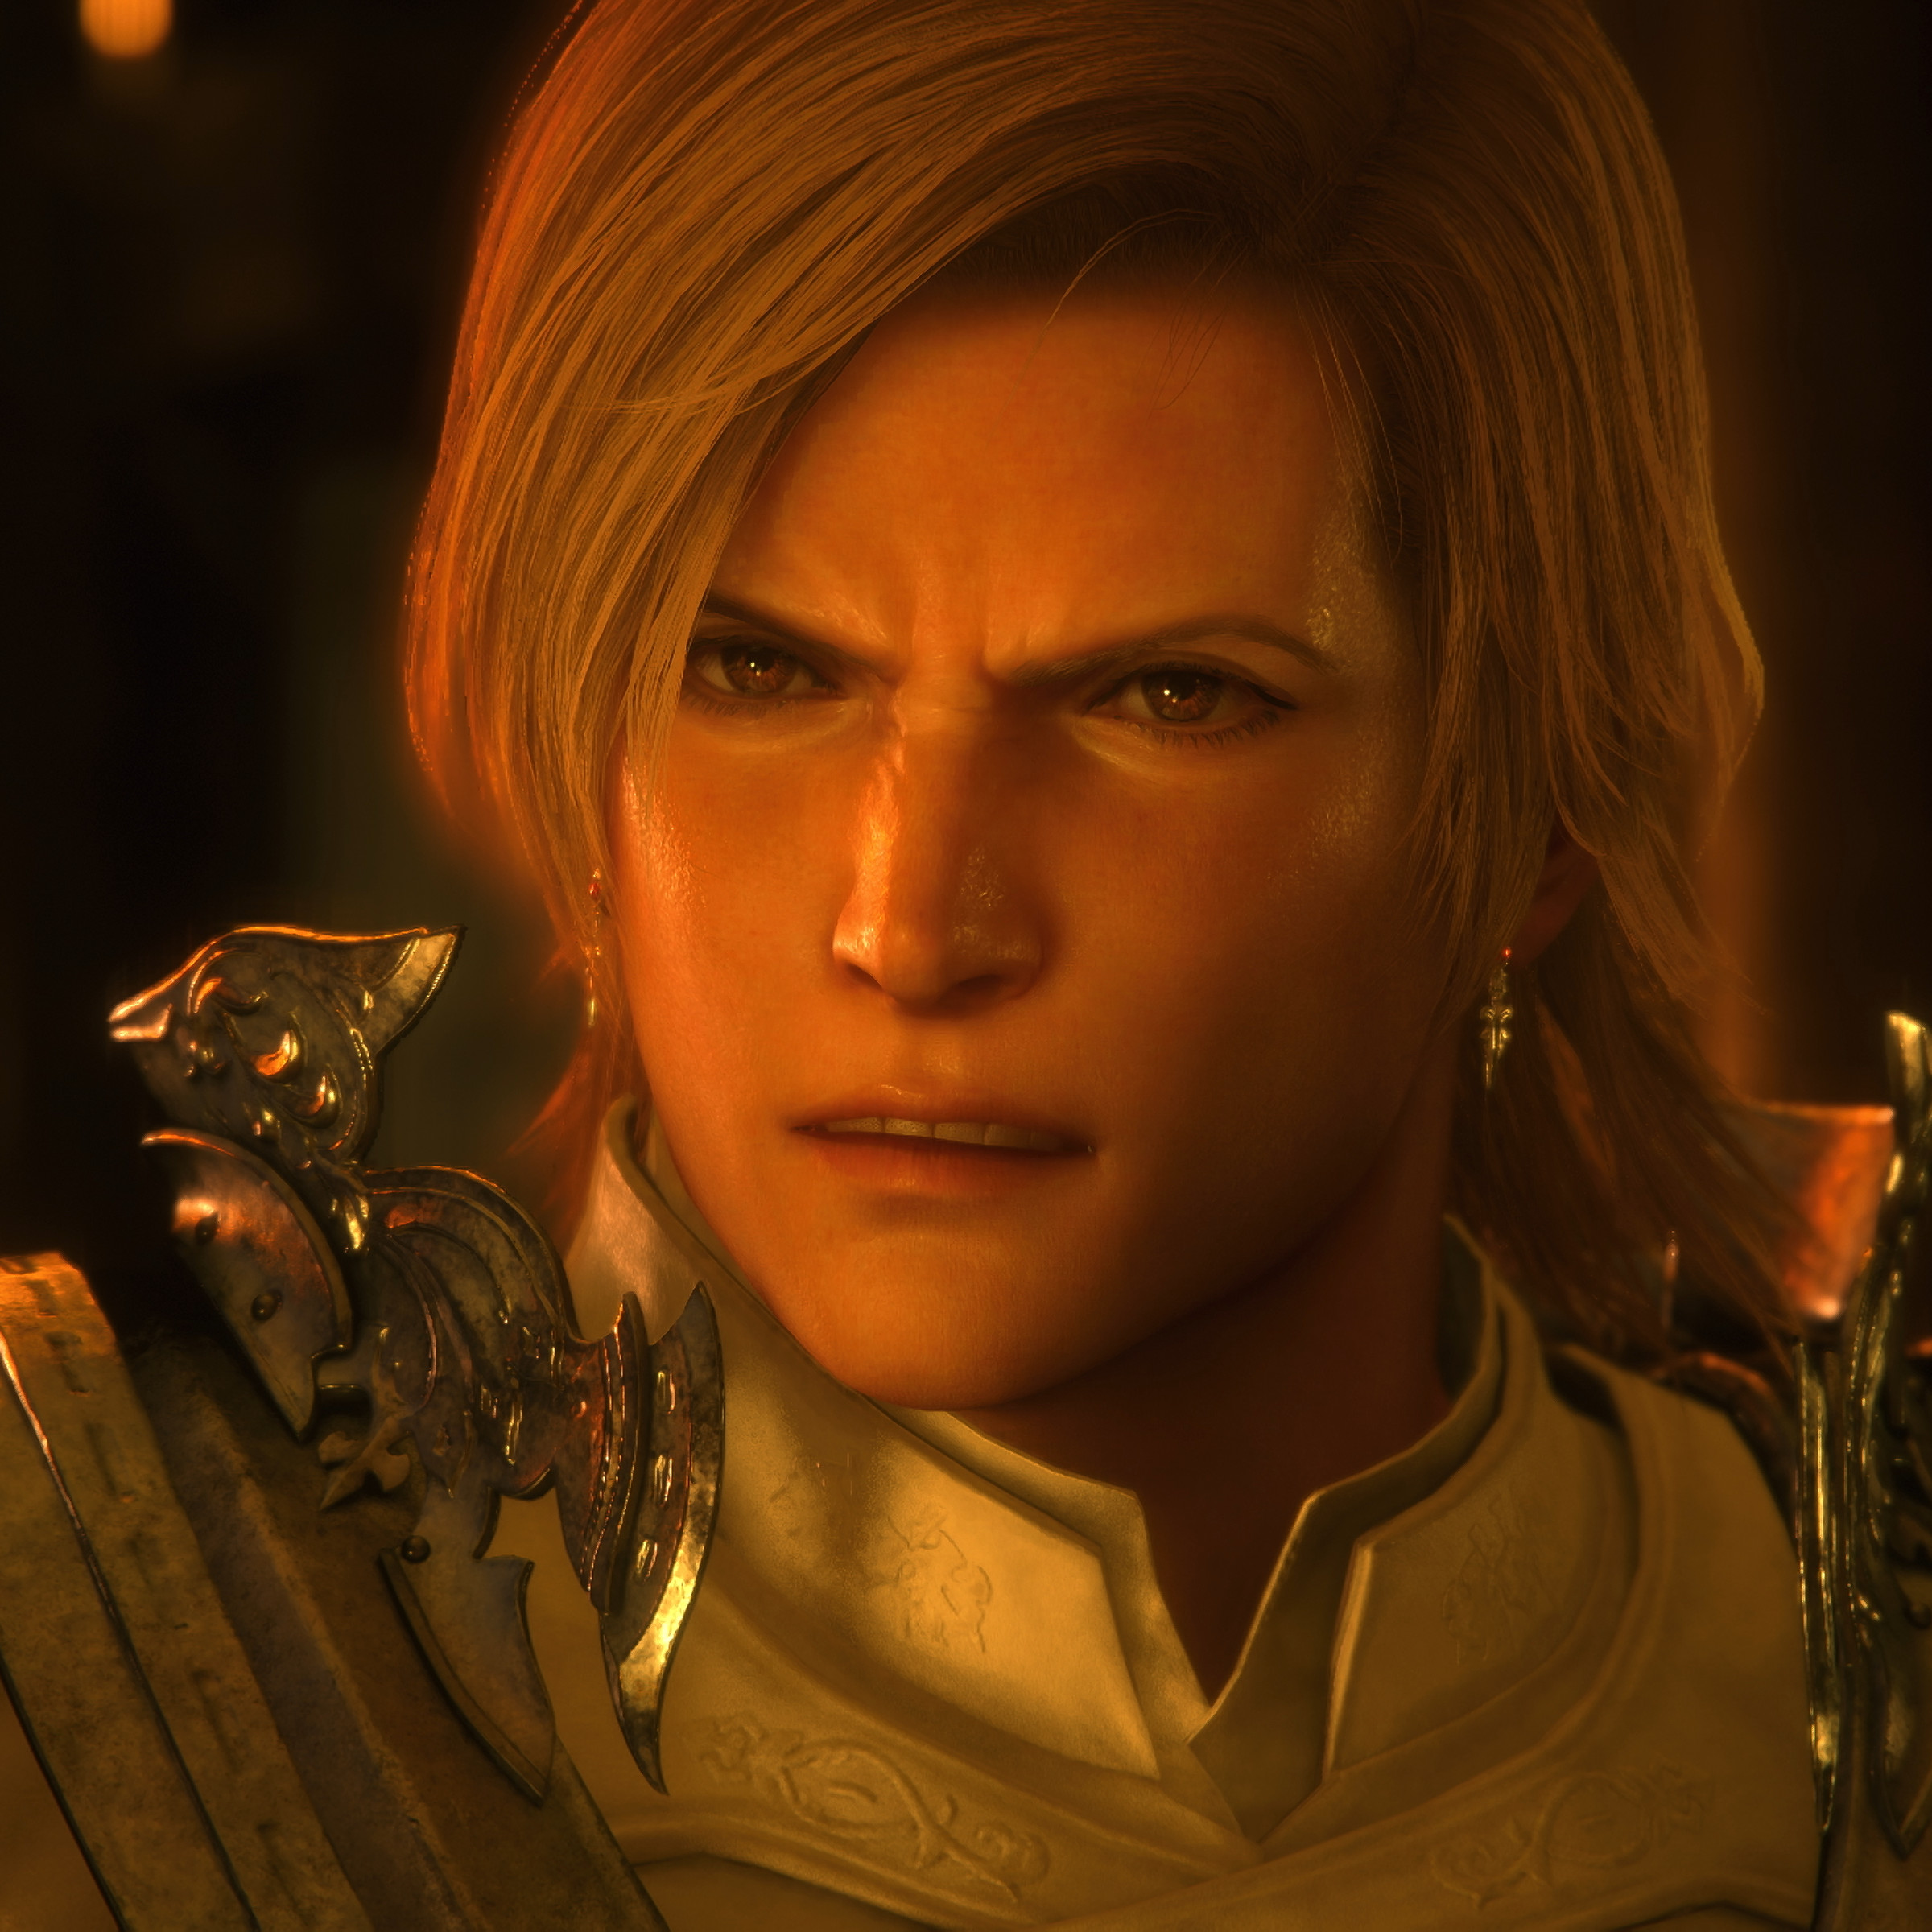 Screenshot from Final Fantasy XVI featuring a close up on the face of the character Dion Lesage